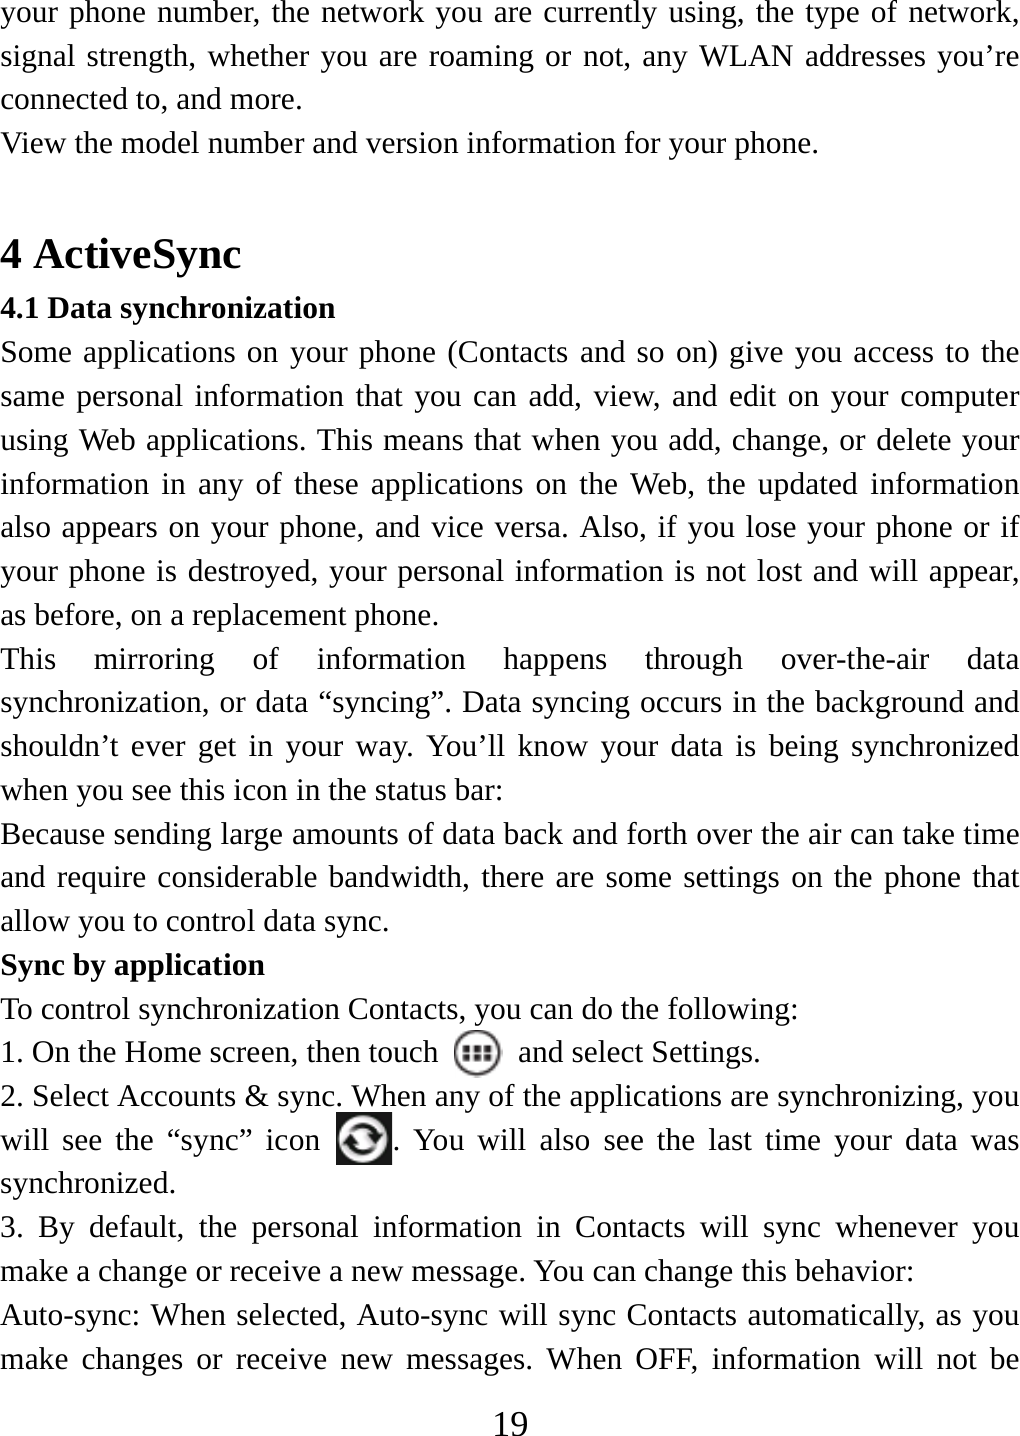   19your phone number, the network you are currently using, the type of network, signal strength, whether you are roaming or not, any WLAN addresses you’re connected to, and more.   View the model number and version information for your phone.  4 ActiveSync 4.1 Data synchronization   Some applications on your phone (Contacts and so on) give you access to the same personal information that you can add, view, and edit on your computer using Web applications. This means that when you add, change, or delete your information in any of these applications on the Web, the updated information also appears on your phone, and vice versa. Also, if you lose your phone or if your phone is destroyed, your personal information is not lost and will appear, as before, on a replacement phone.   This mirroring of information happens through over-the-air data synchronization, or data “syncing”. Data syncing occurs in the background and shouldn’t ever get in your way. You’ll know your data is being synchronized when you see this icon in the status bar:   Because sending large amounts of data back and forth over the air can take time and require considerable bandwidth, there are some settings on the phone that allow you to control data sync.   Sync by application   To control synchronization Contacts, you can do the following:   1. On the Home screen, then touch    and select Settings.   2. Select Accounts &amp; sync. When any of the applications are synchronizing, you will see the “sync” icon  . You will also see the last time your data was synchronized.  3. By default, the personal information in Contacts will sync whenever you make a change or receive a new message. You can change this behavior:   Auto-sync: When selected, Auto-sync will sync Contacts automatically, as you make changes or receive new messages. When OFF, information will not be 